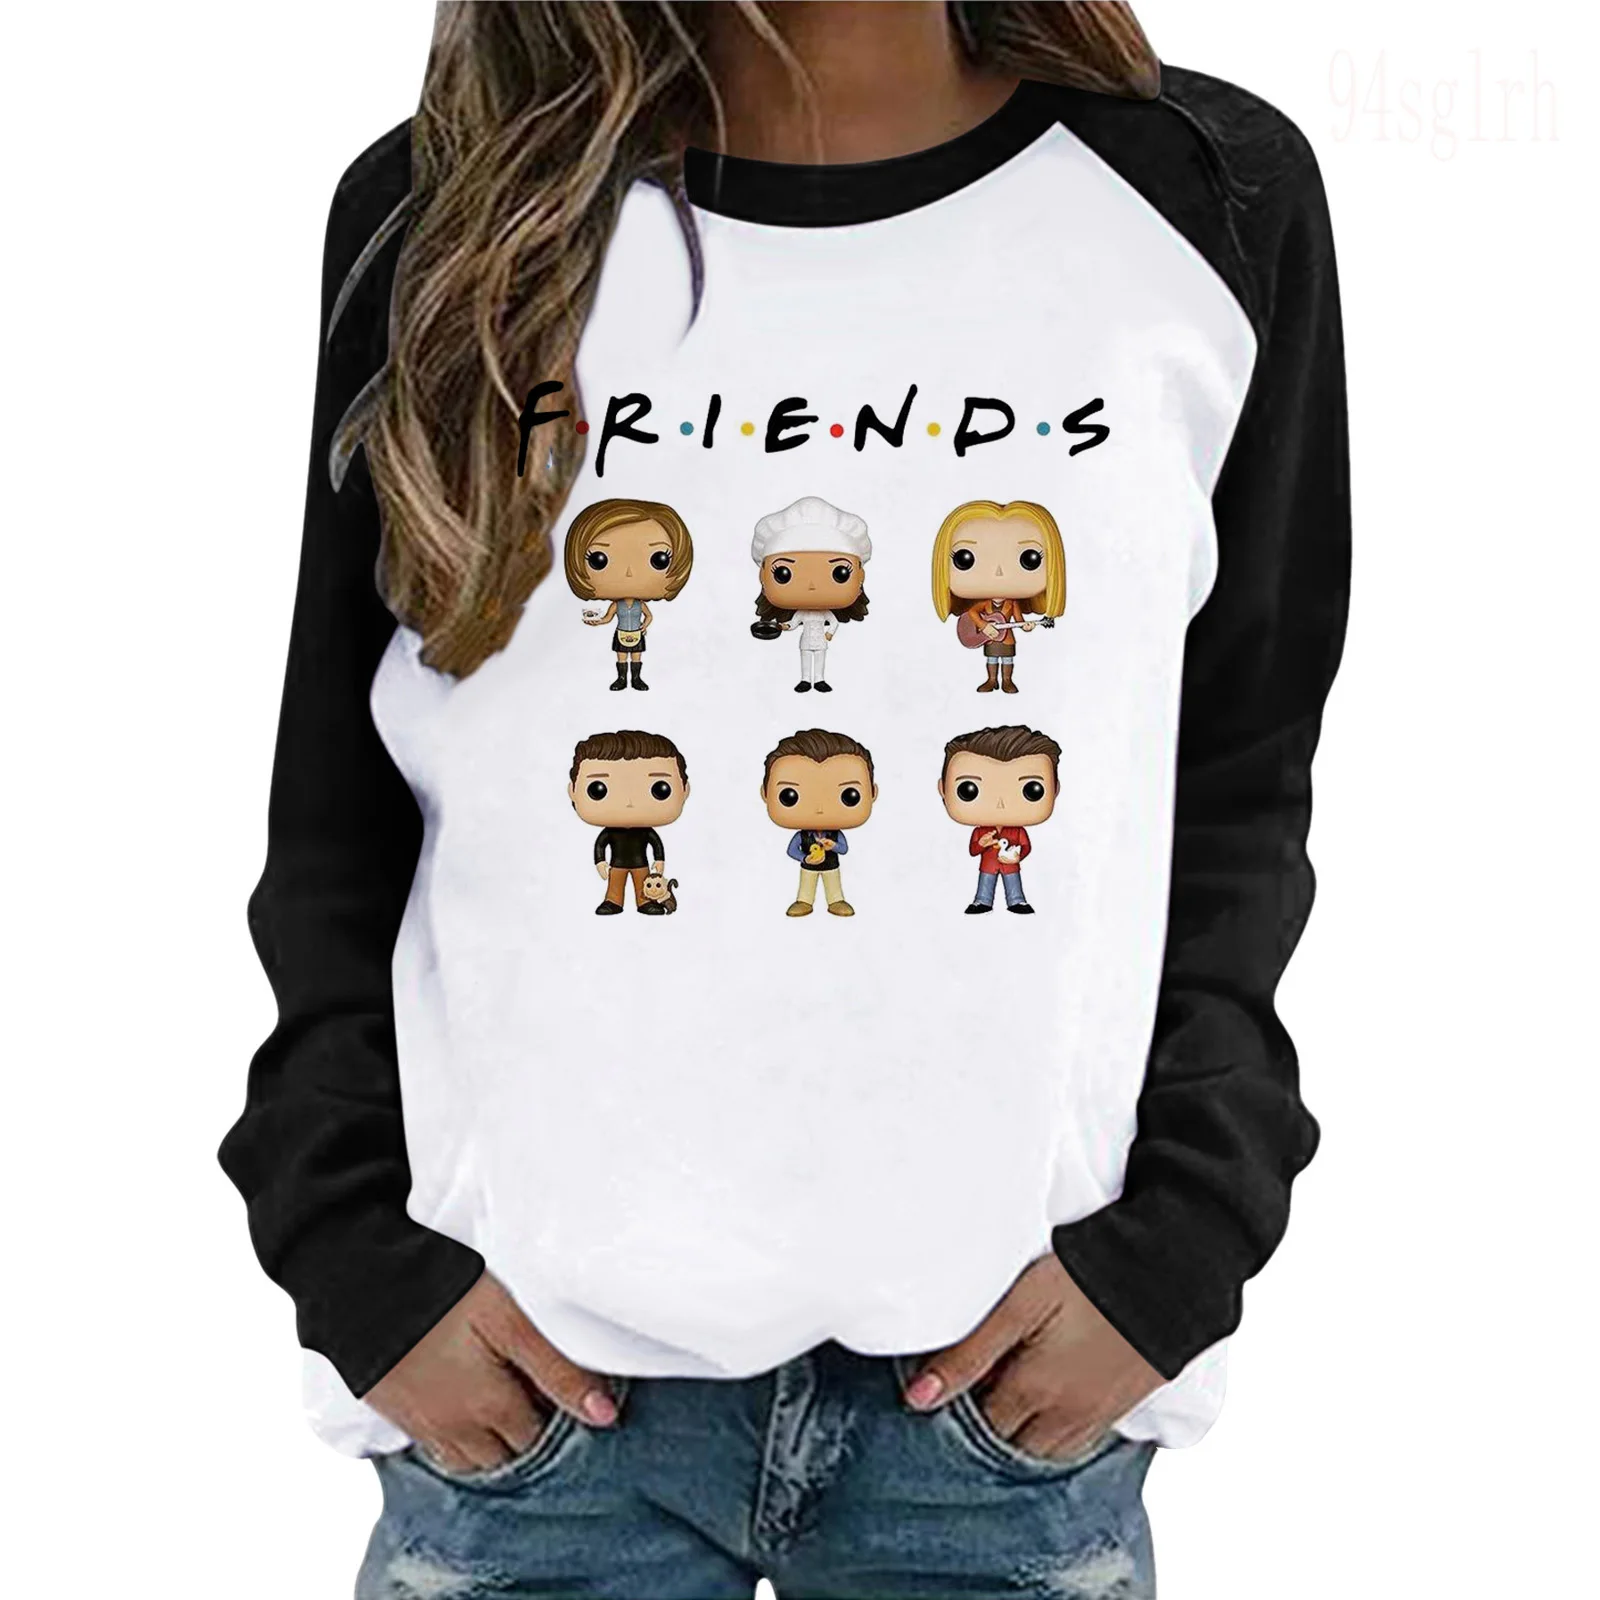 New Friends Tv Show Funny Cartoon T Shirt Women Aesthetic Best Friends Graphic T-shirt Streetwear Long Sleeve Tshirt Tops Female graphic tees Tees